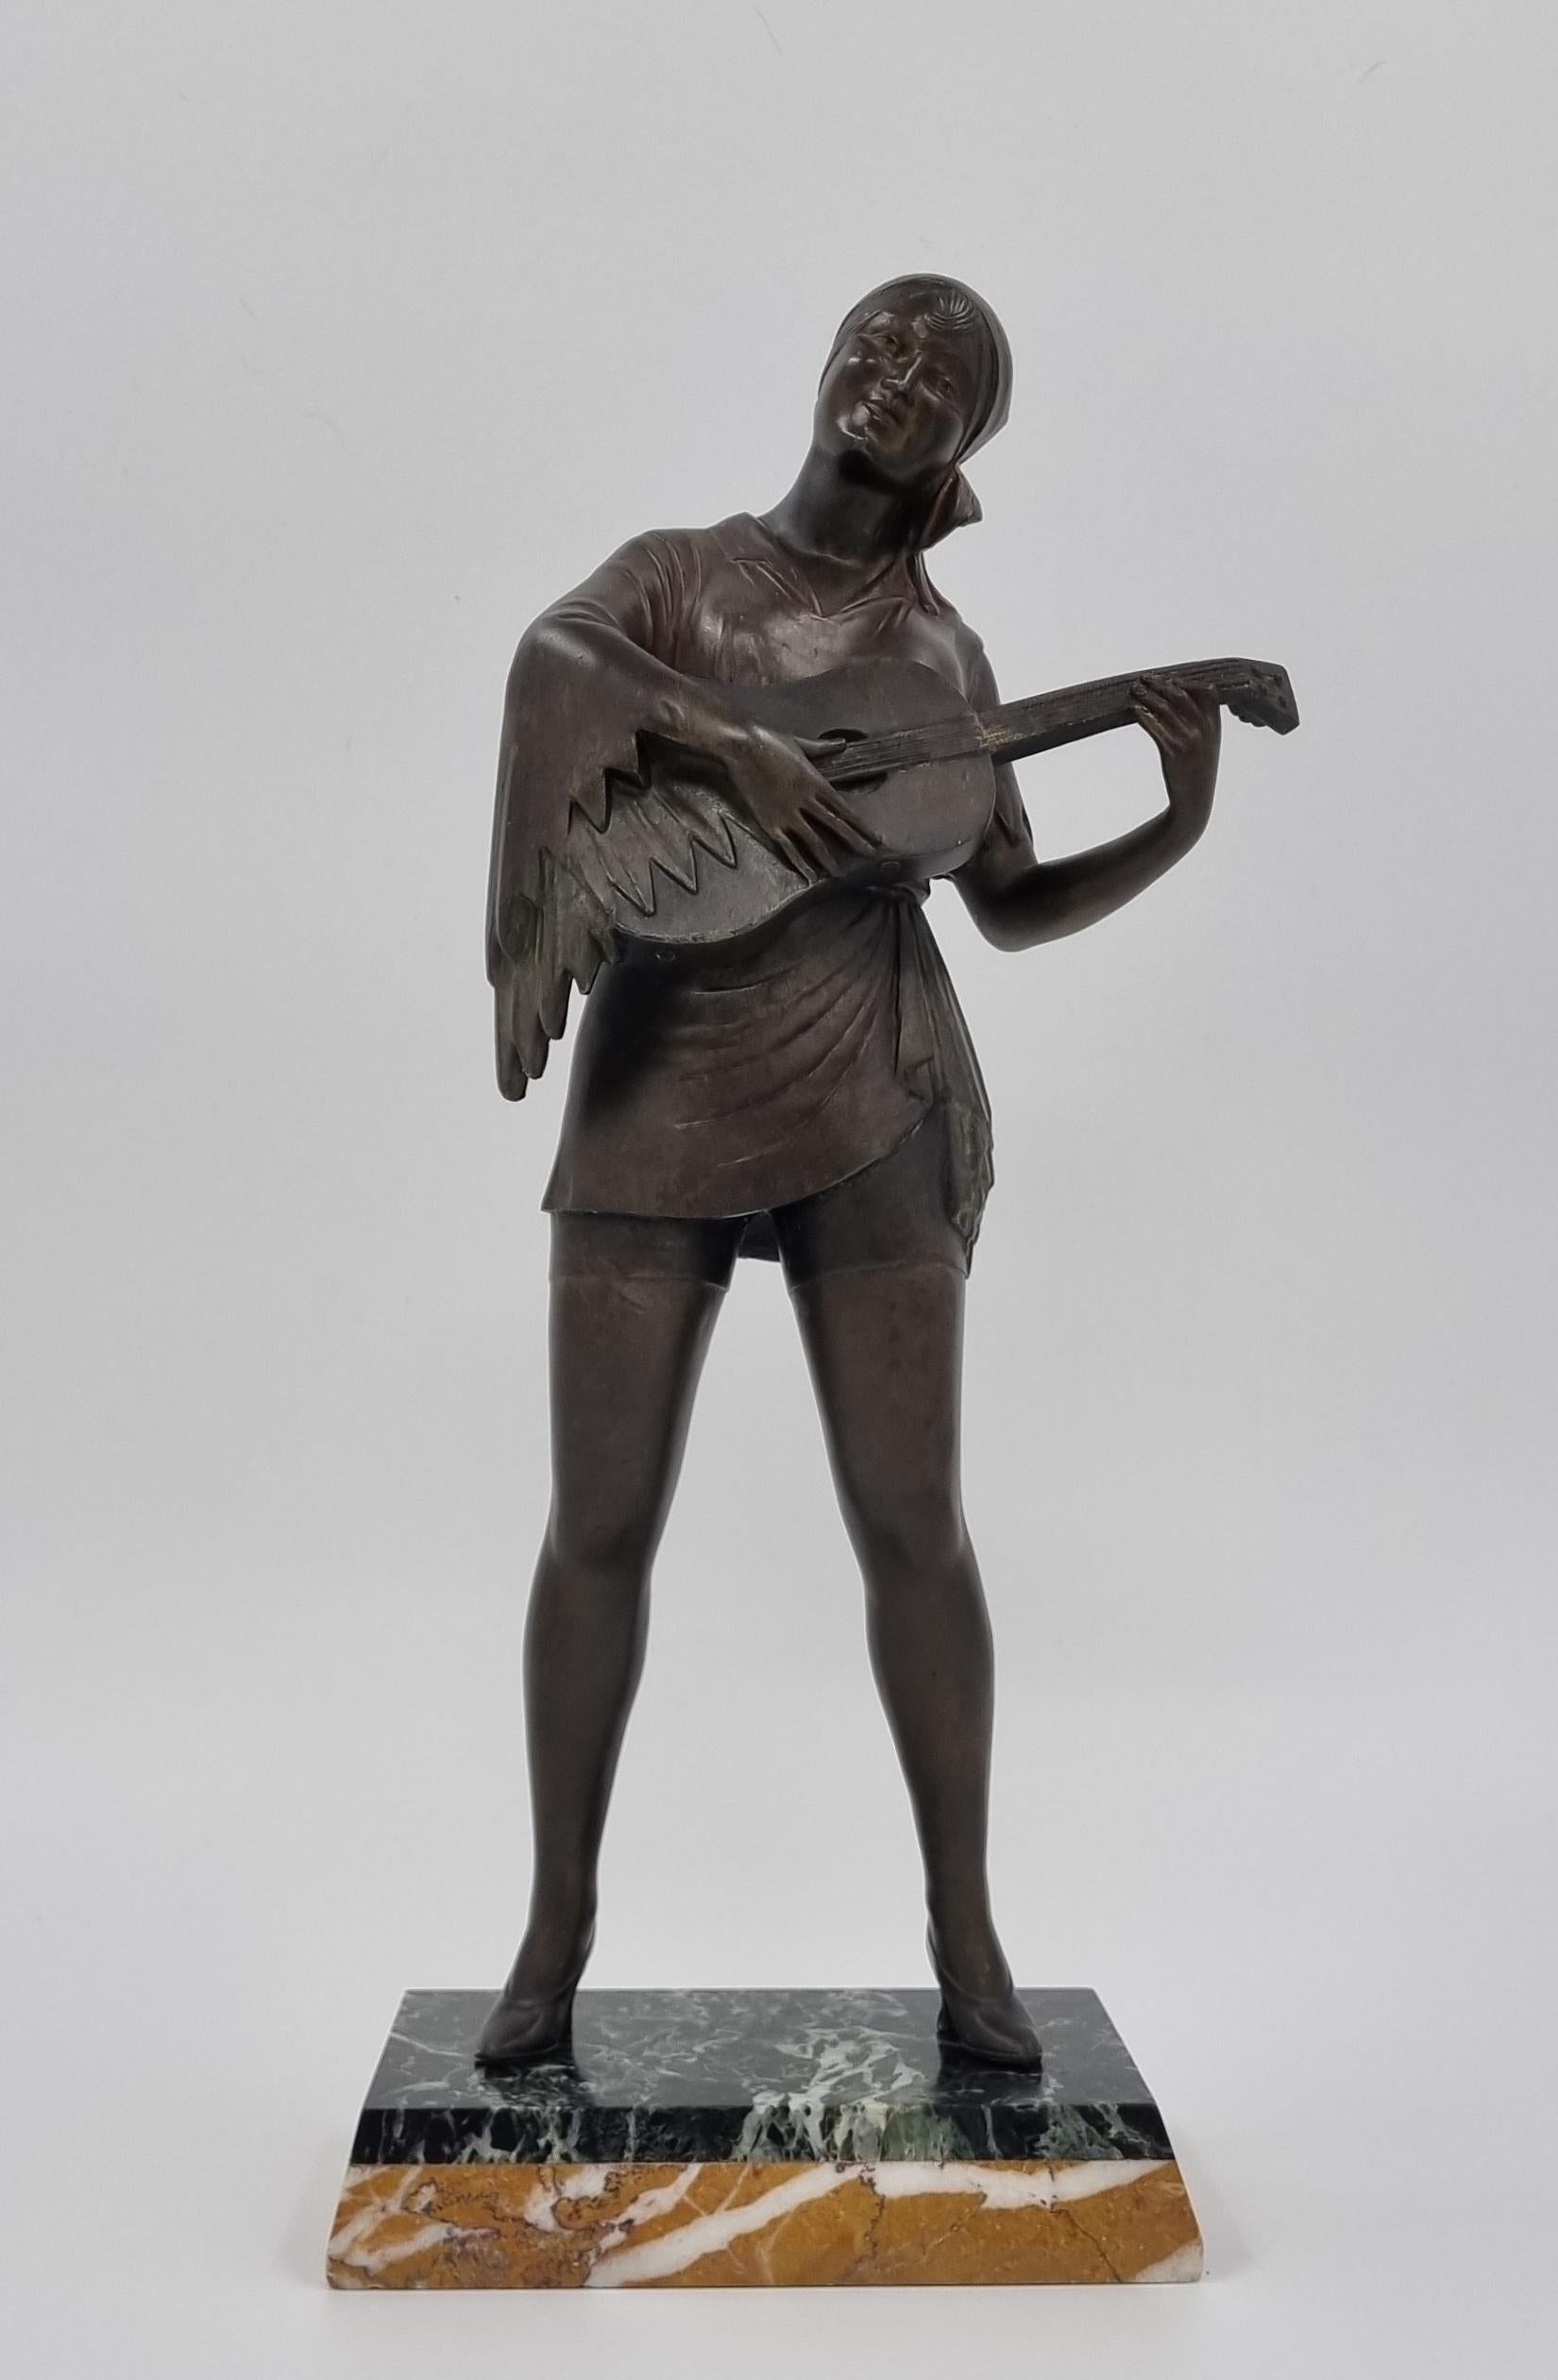 Tall Art Deco sculpture of a lady playing the guitar, cast in cold painted spelter, depicted wearing a flowing gypsy-style intricately detailed costume , with every fold and movement captured perfectly. All crafted to give an impression of the style